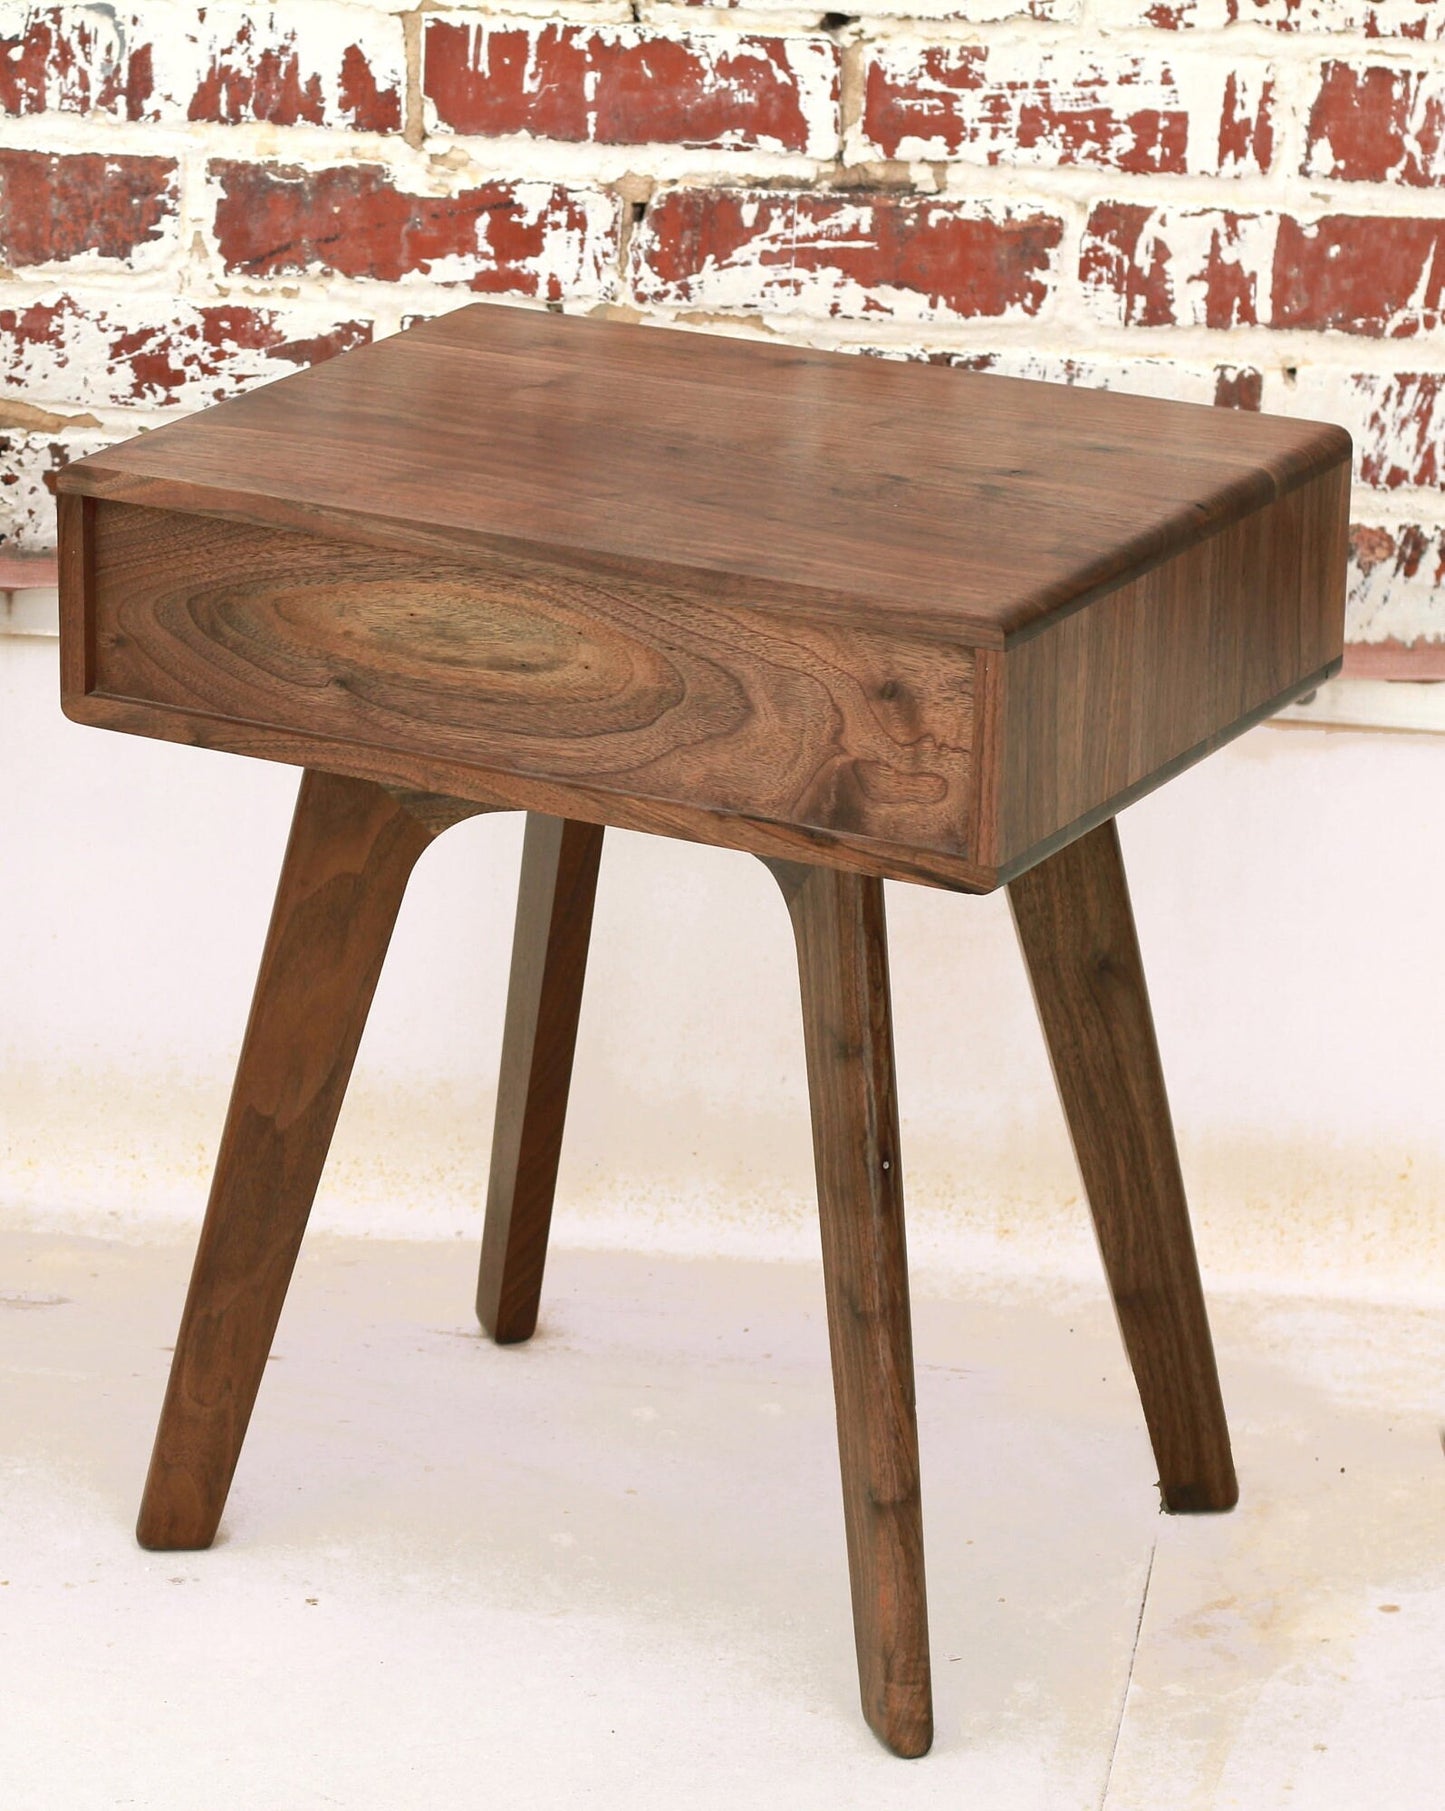 Nightstand Plus - Midcentury Walnut Bedside Table, Modern End Table in walnut, Danish Accent Table